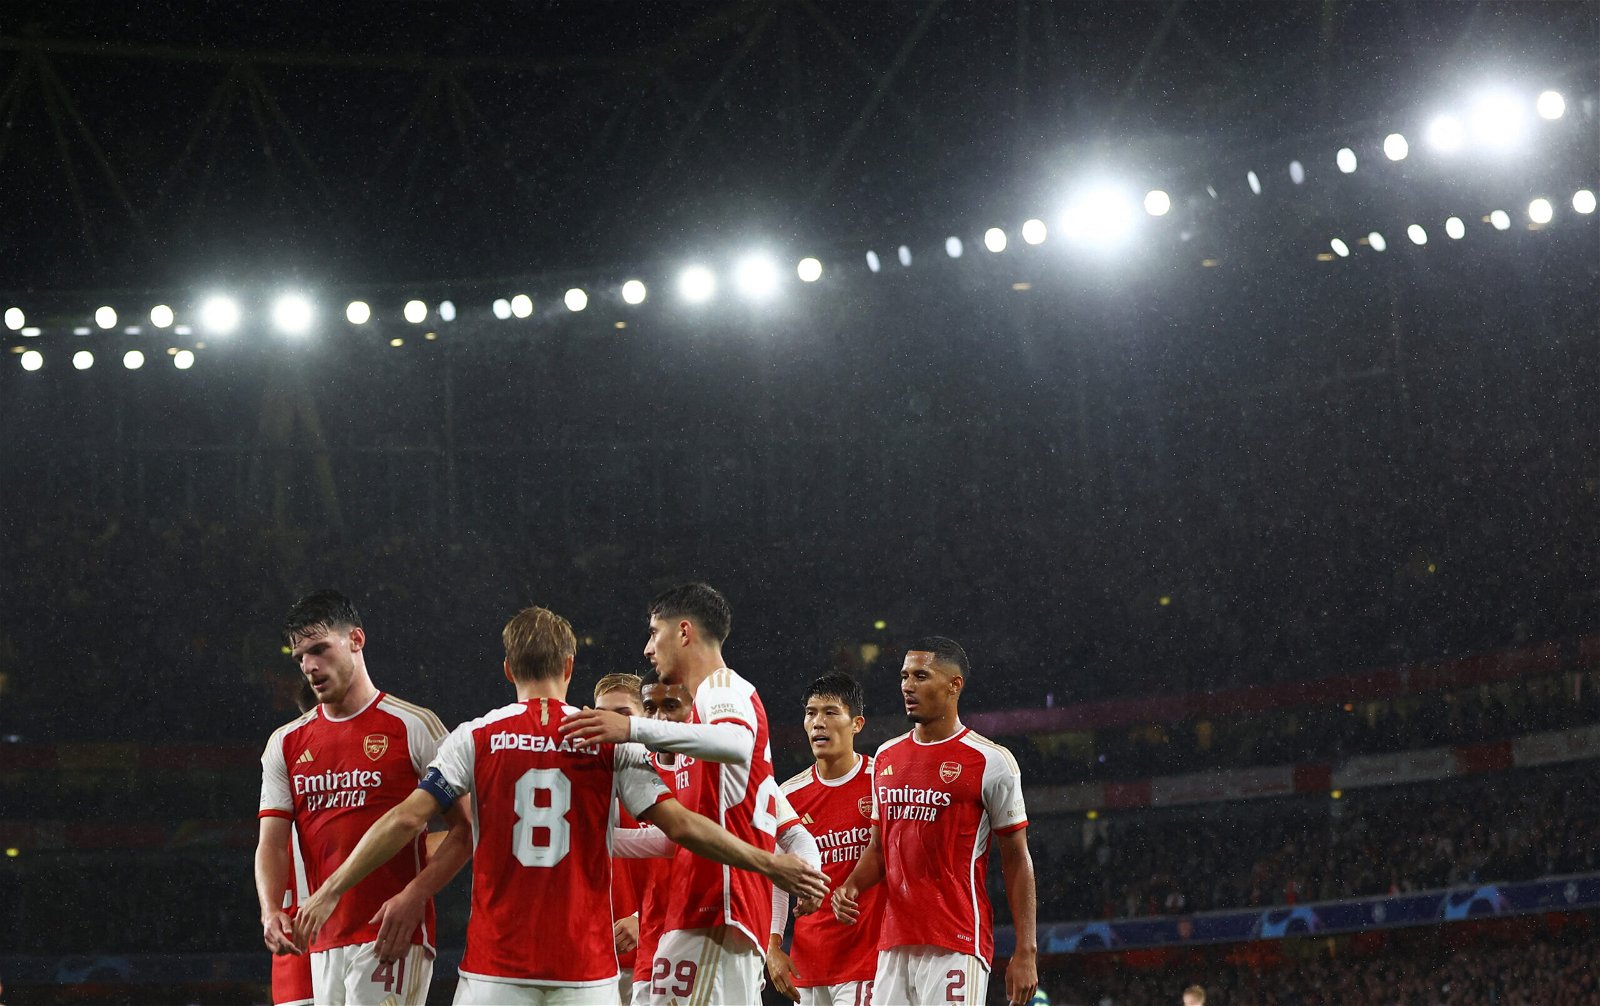 Arsenal 4-0 PSV Eindhoven Match Stats and Post-Match Reaction -Arsenal Mania